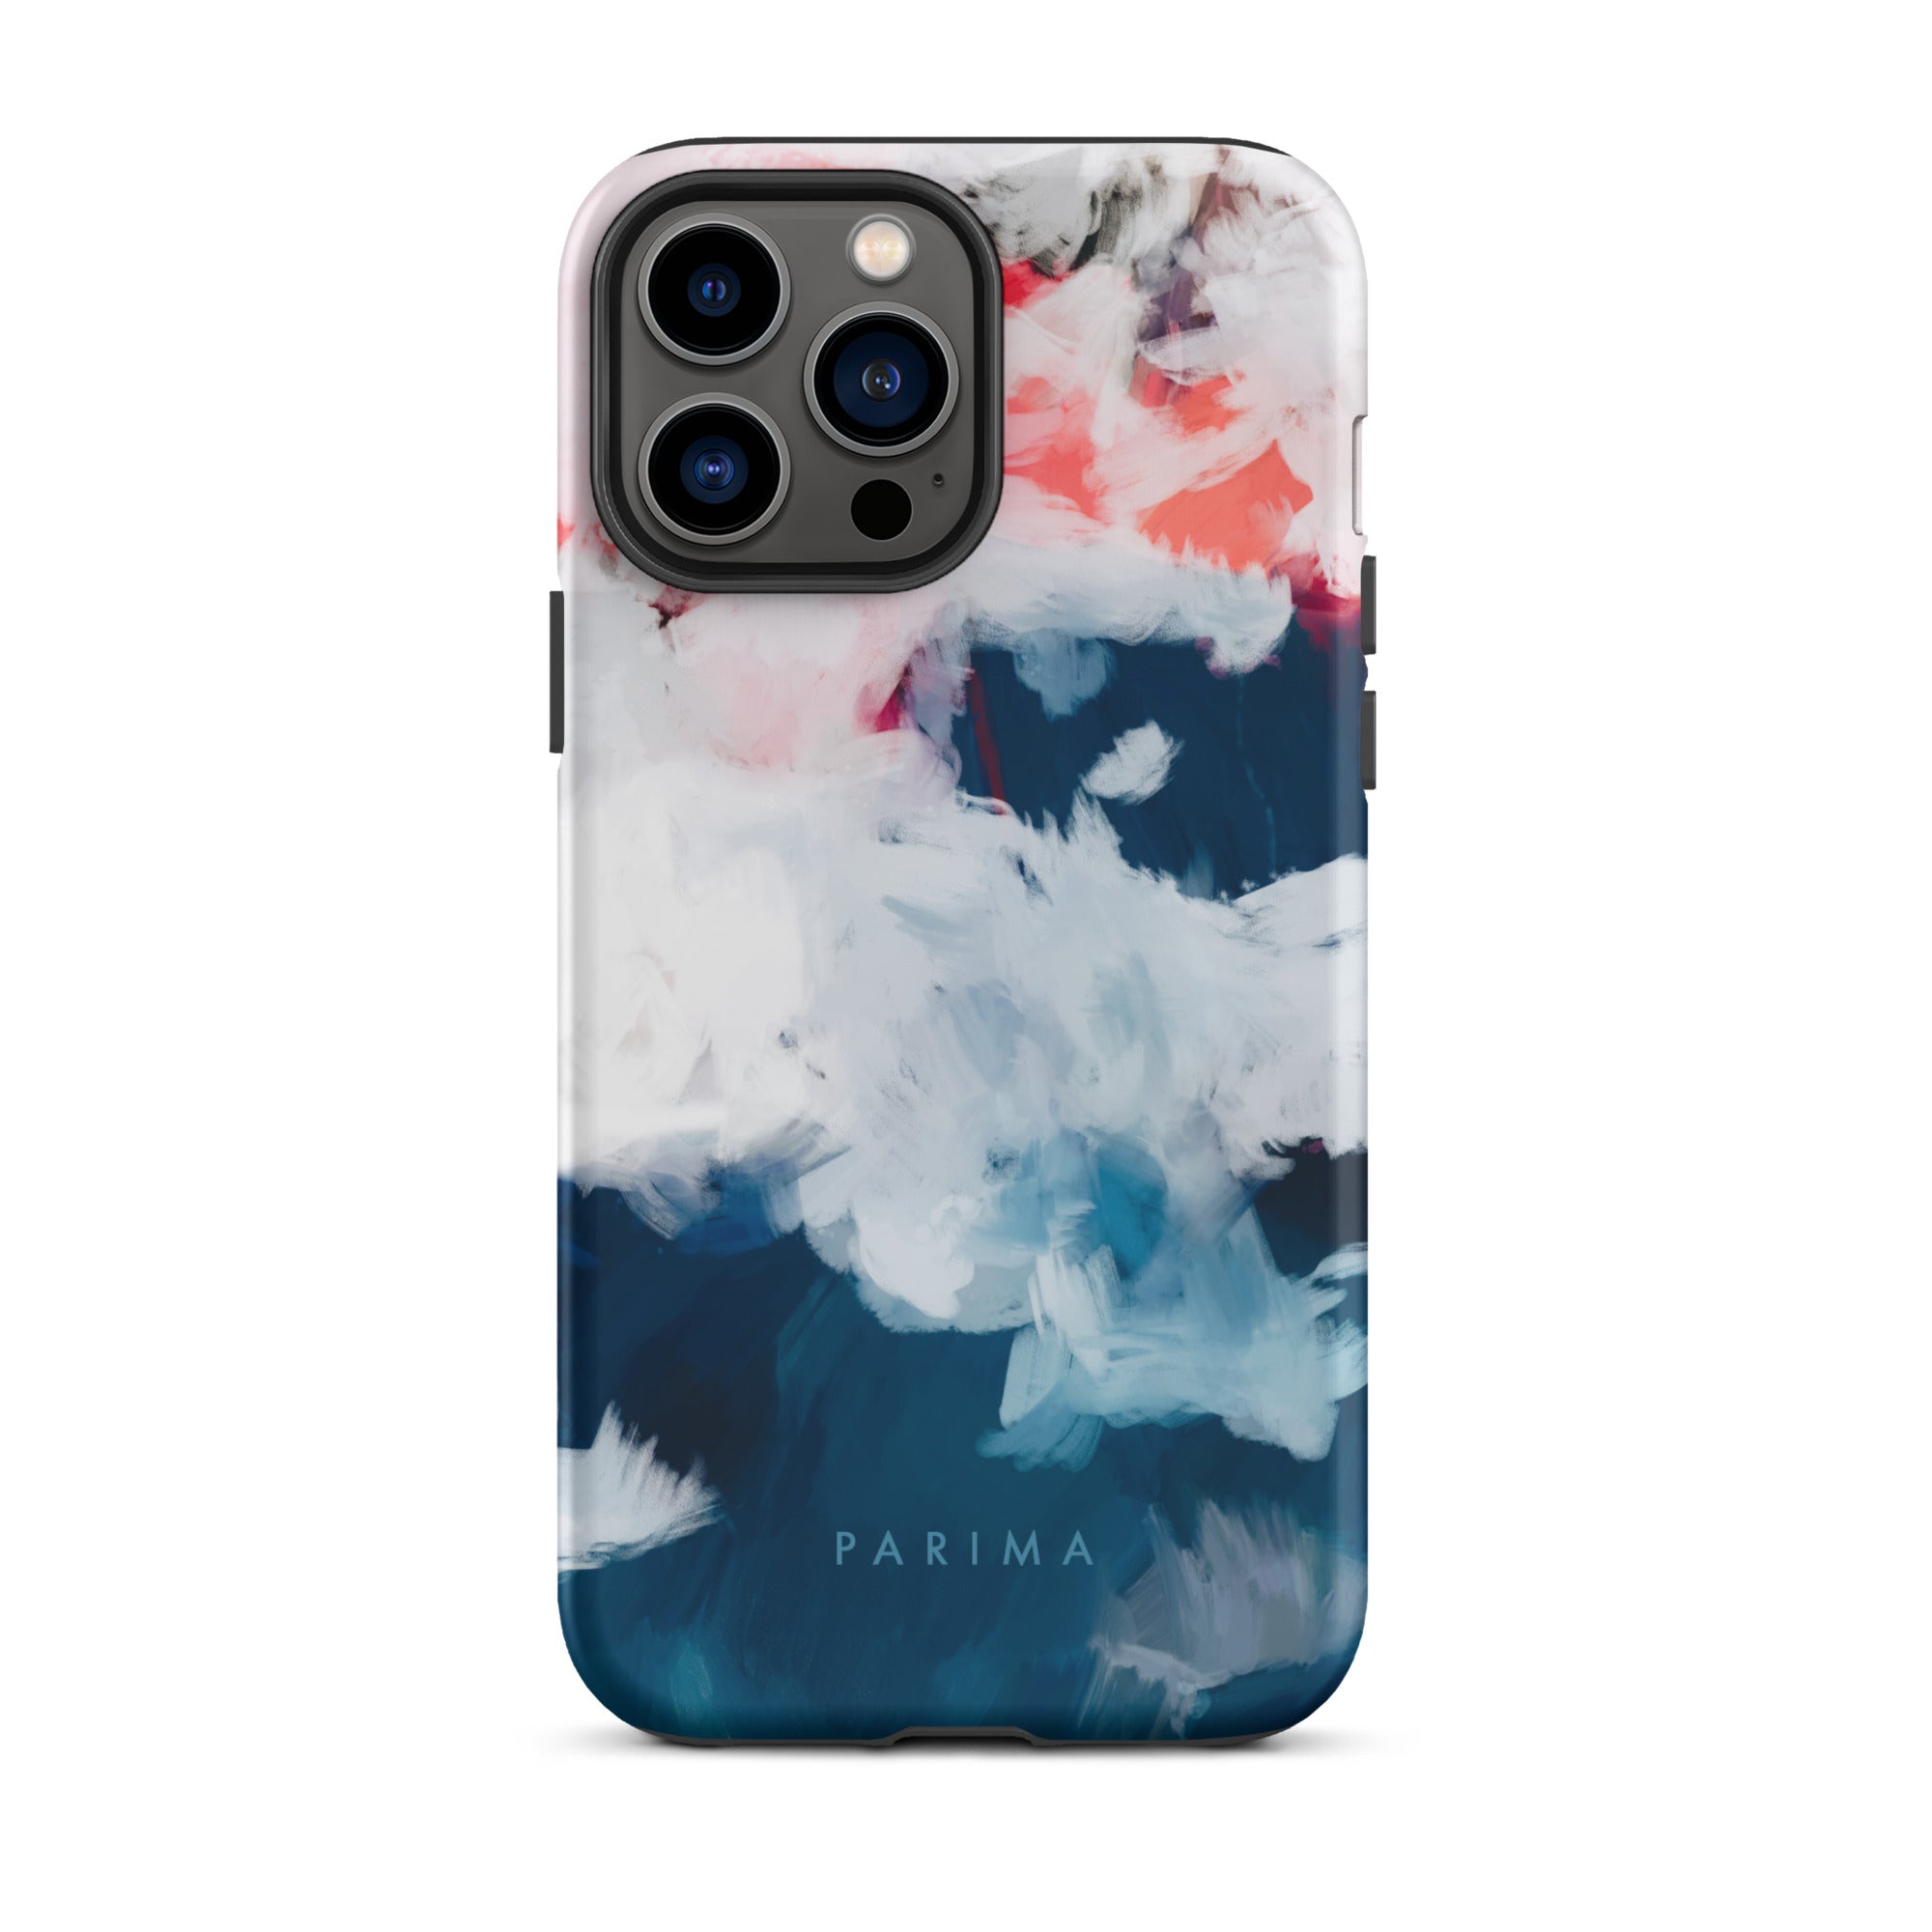 Oceane, blue and pink abstract art on iPhone 13 Pro Max tough case by Parima Studio